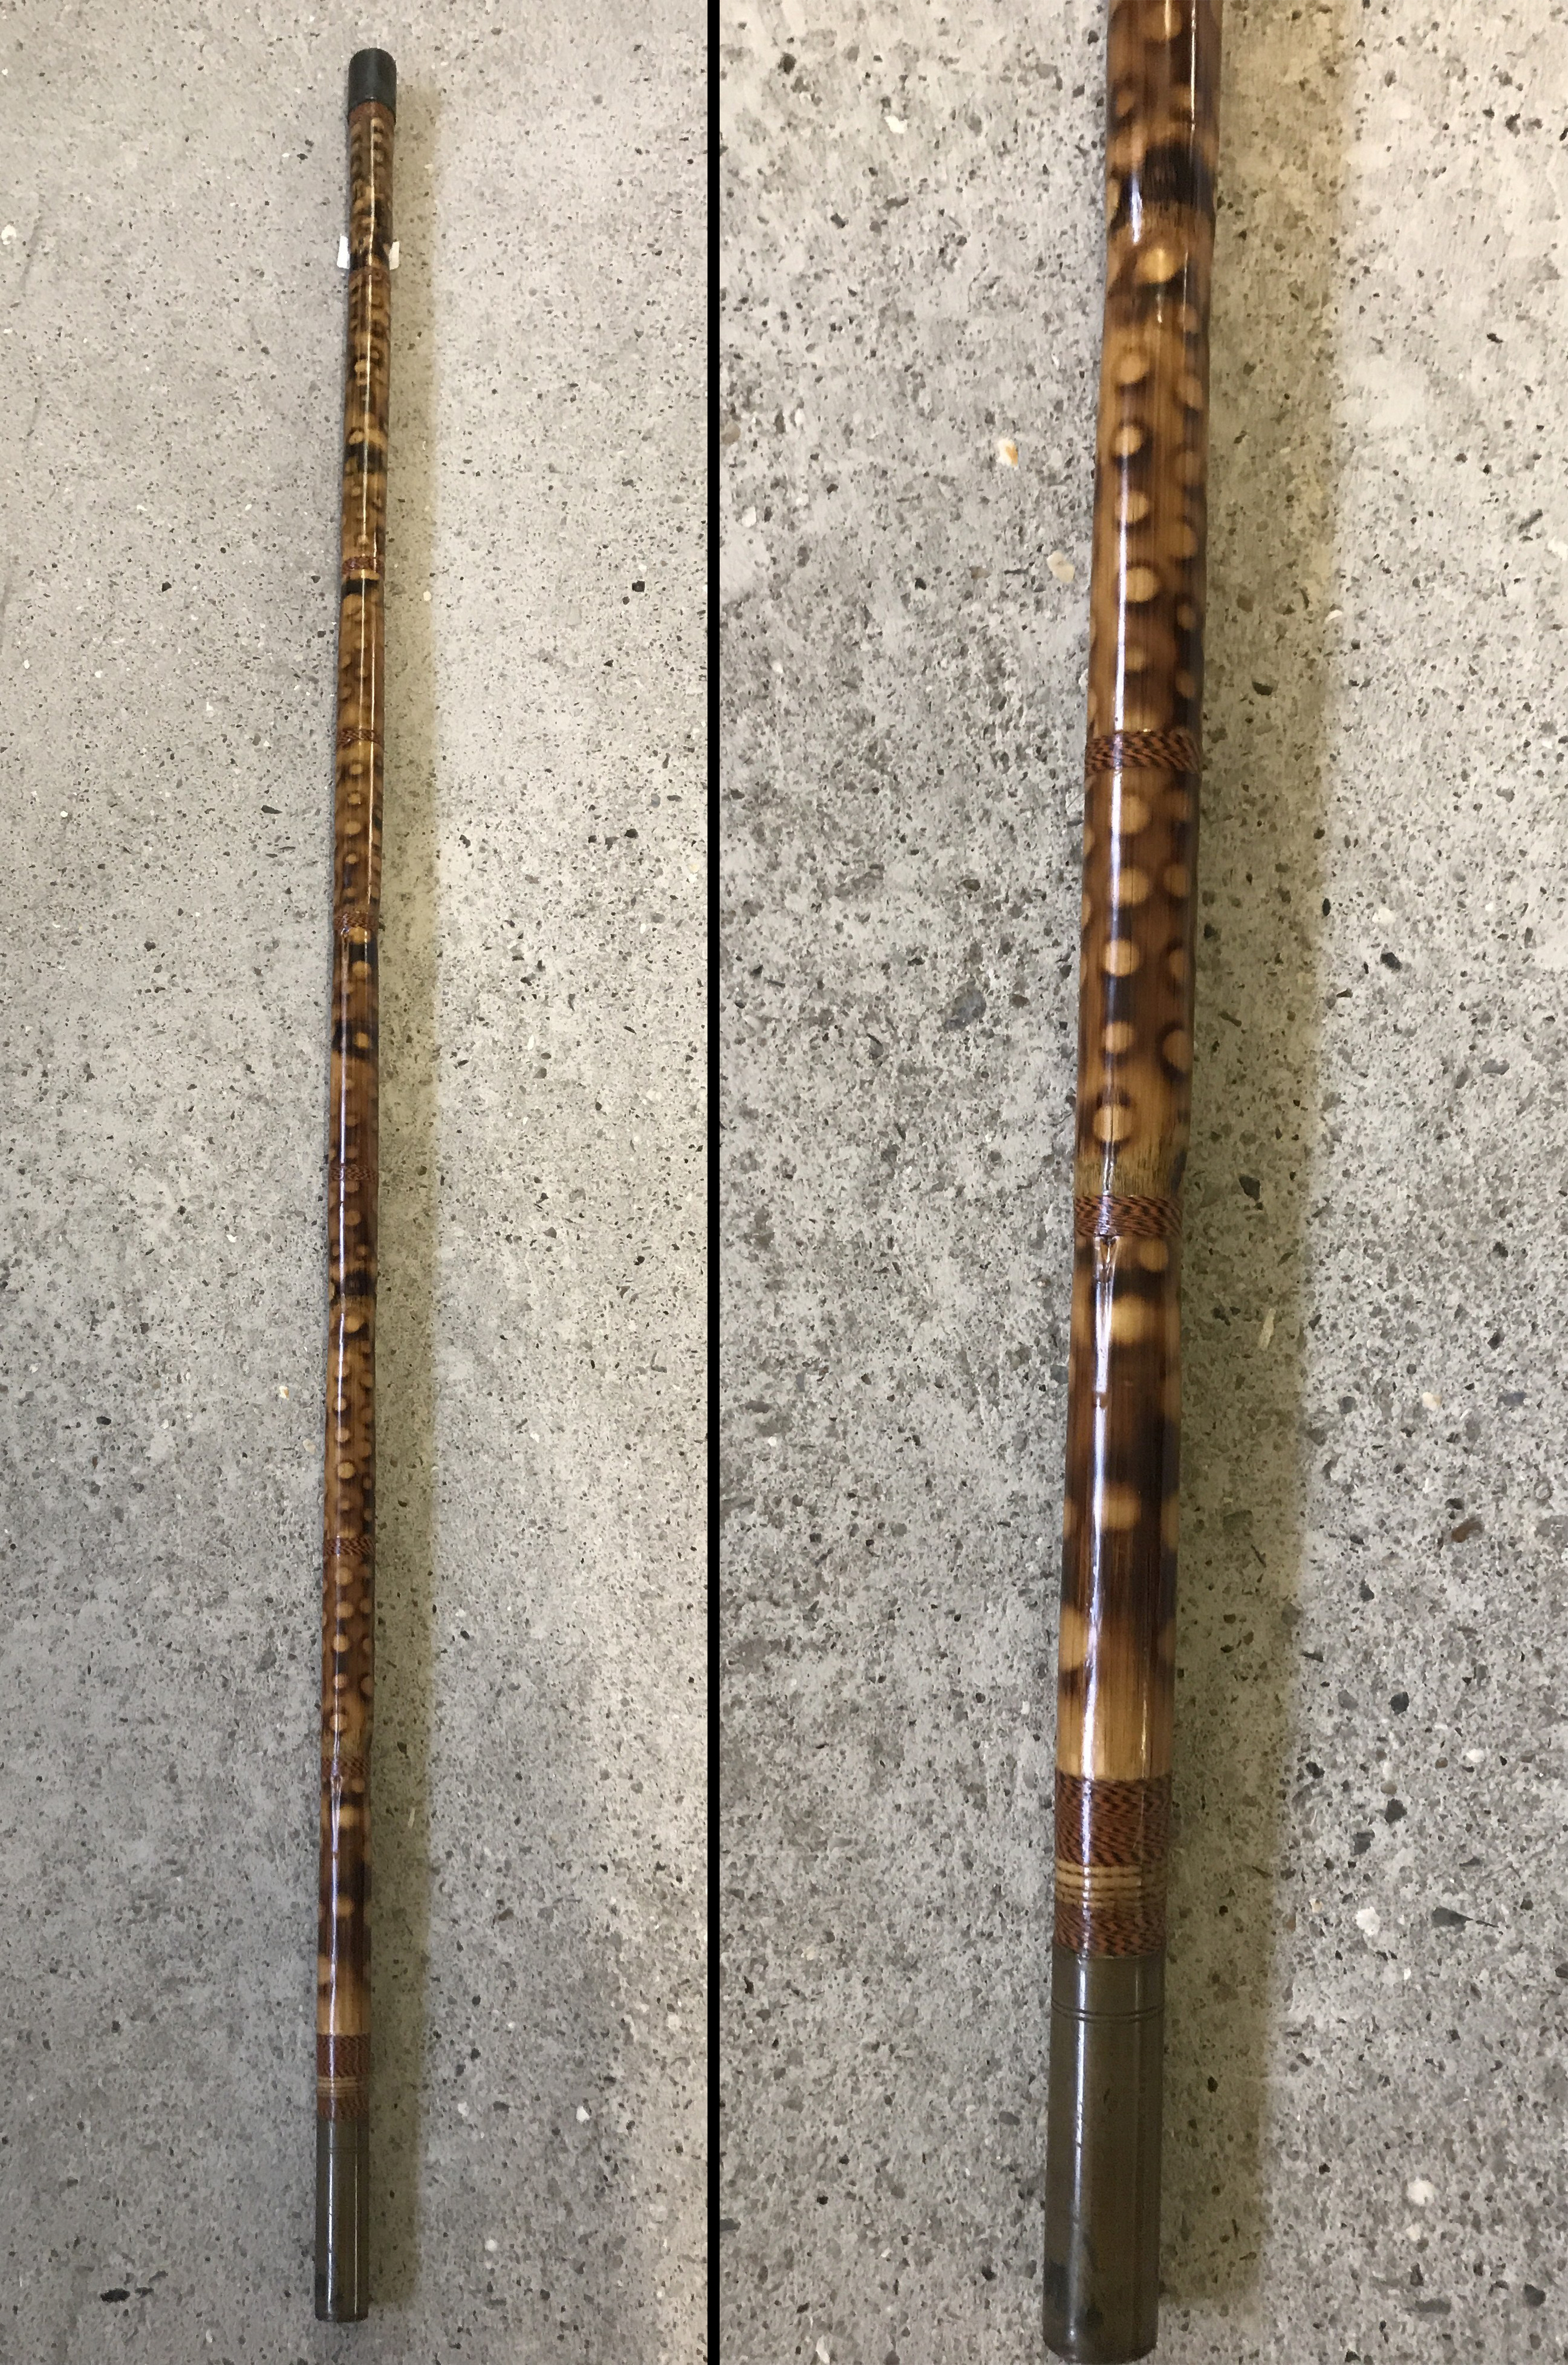 1 piece bamboo Hollow Stick fishing rod by Ghillies Hollow Stick c1930.